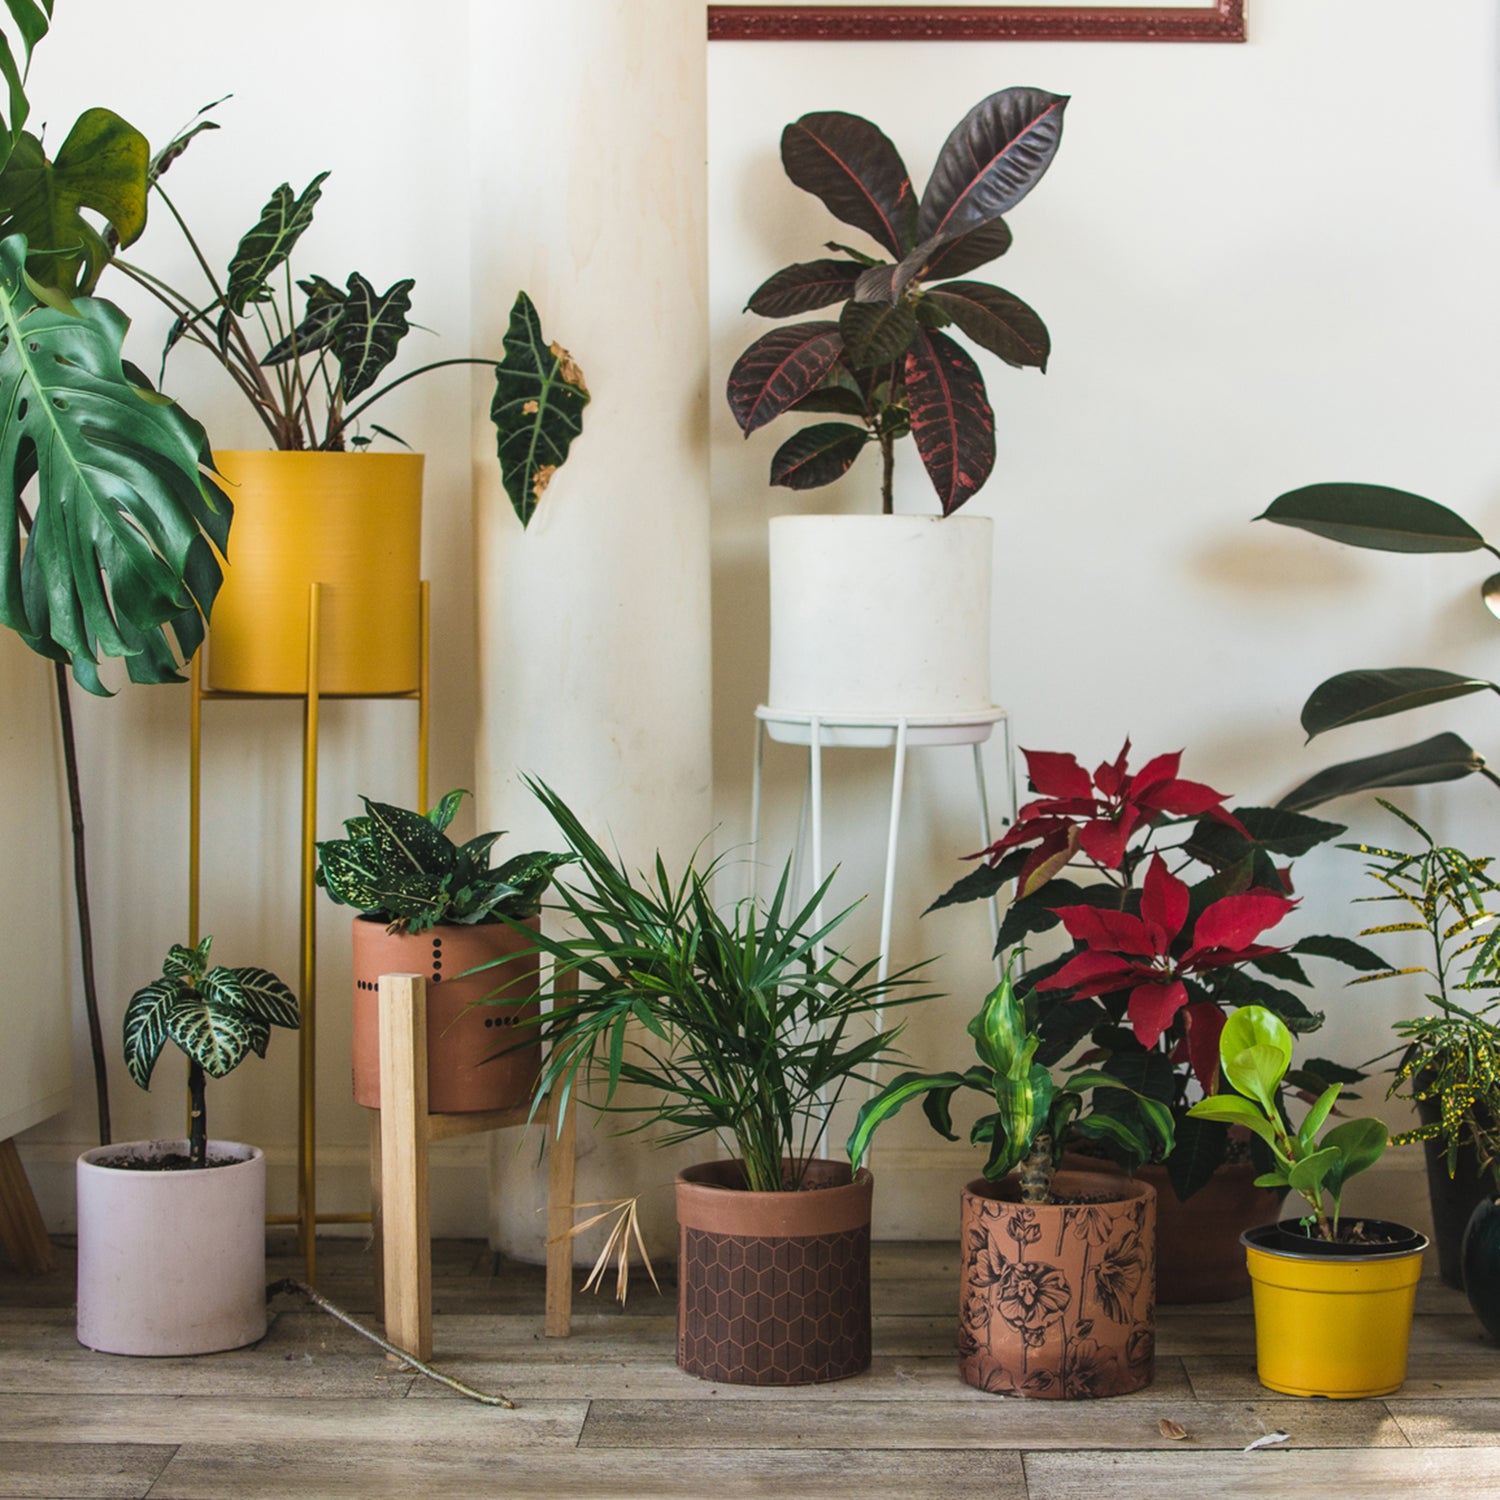 5 Things to Consider Before Buying an Indoor Plant